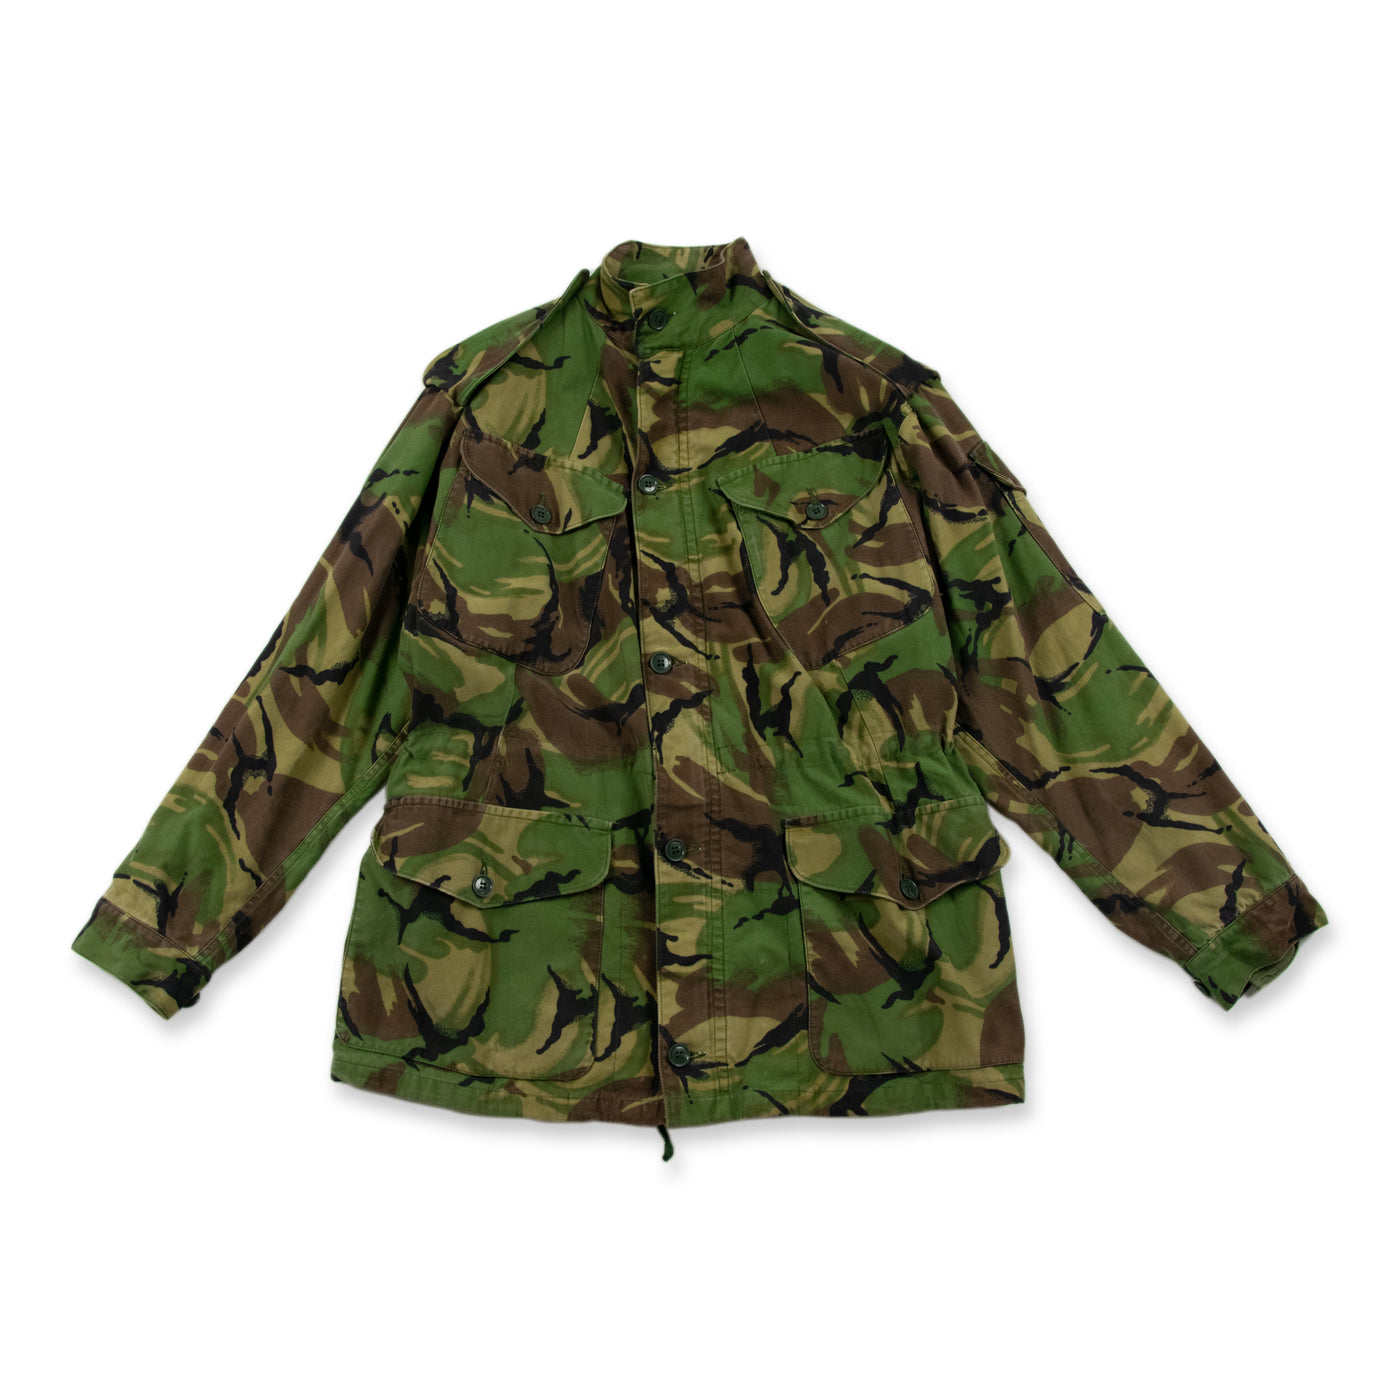 Vintage 90s British Army Combat Smock Temperate Woodland DPM Camo Jacket M FRONT